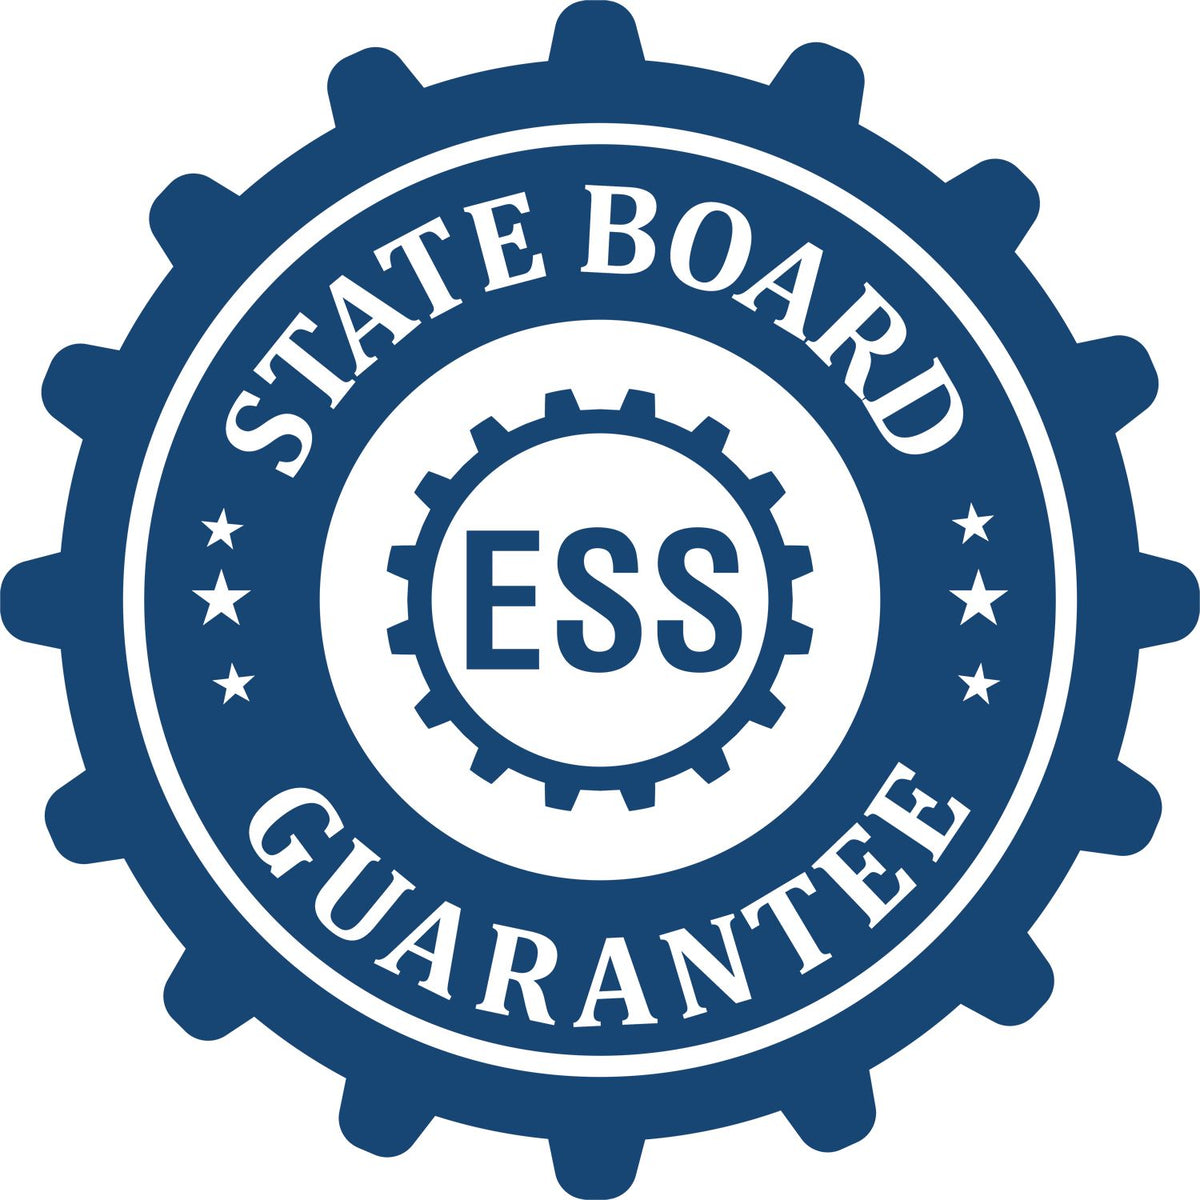 An emblem in a gear shape illustrating a state board guarantee for the Ohio Geologist Desk Seal